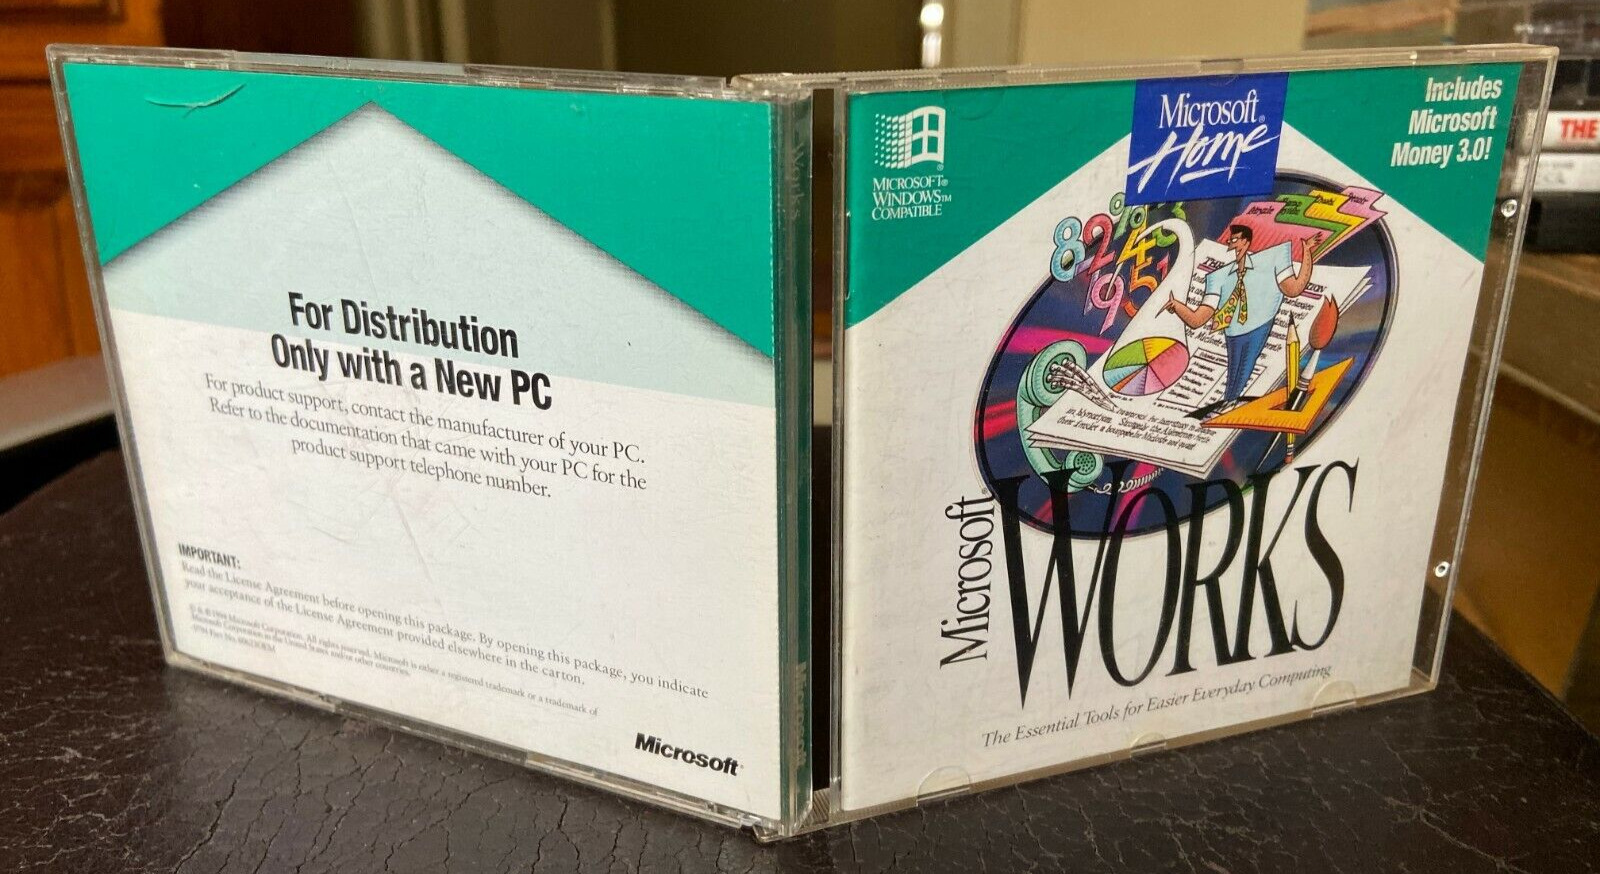 Microsoft Home: Works, 1994, including Money. PC operating system software CD.